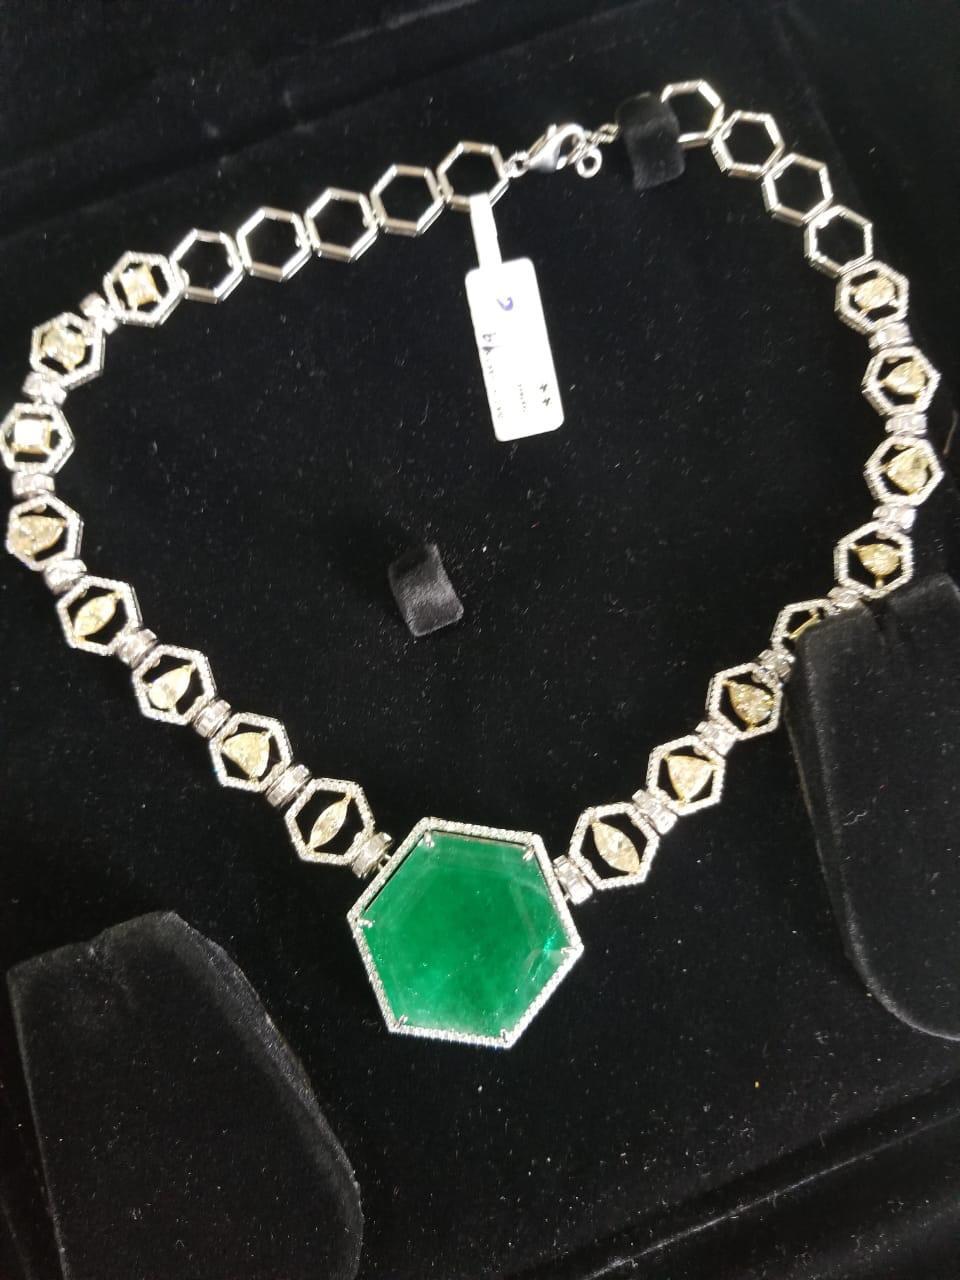 A stunning natural Zambian Emerald and Diamonds Necklace set in 18K gold. The weight of the Zambian Emerald is 70.04 carats. The Emerald is completely natural, without any treatment. The combined weight of the diamonds is 18.13 carats. The single